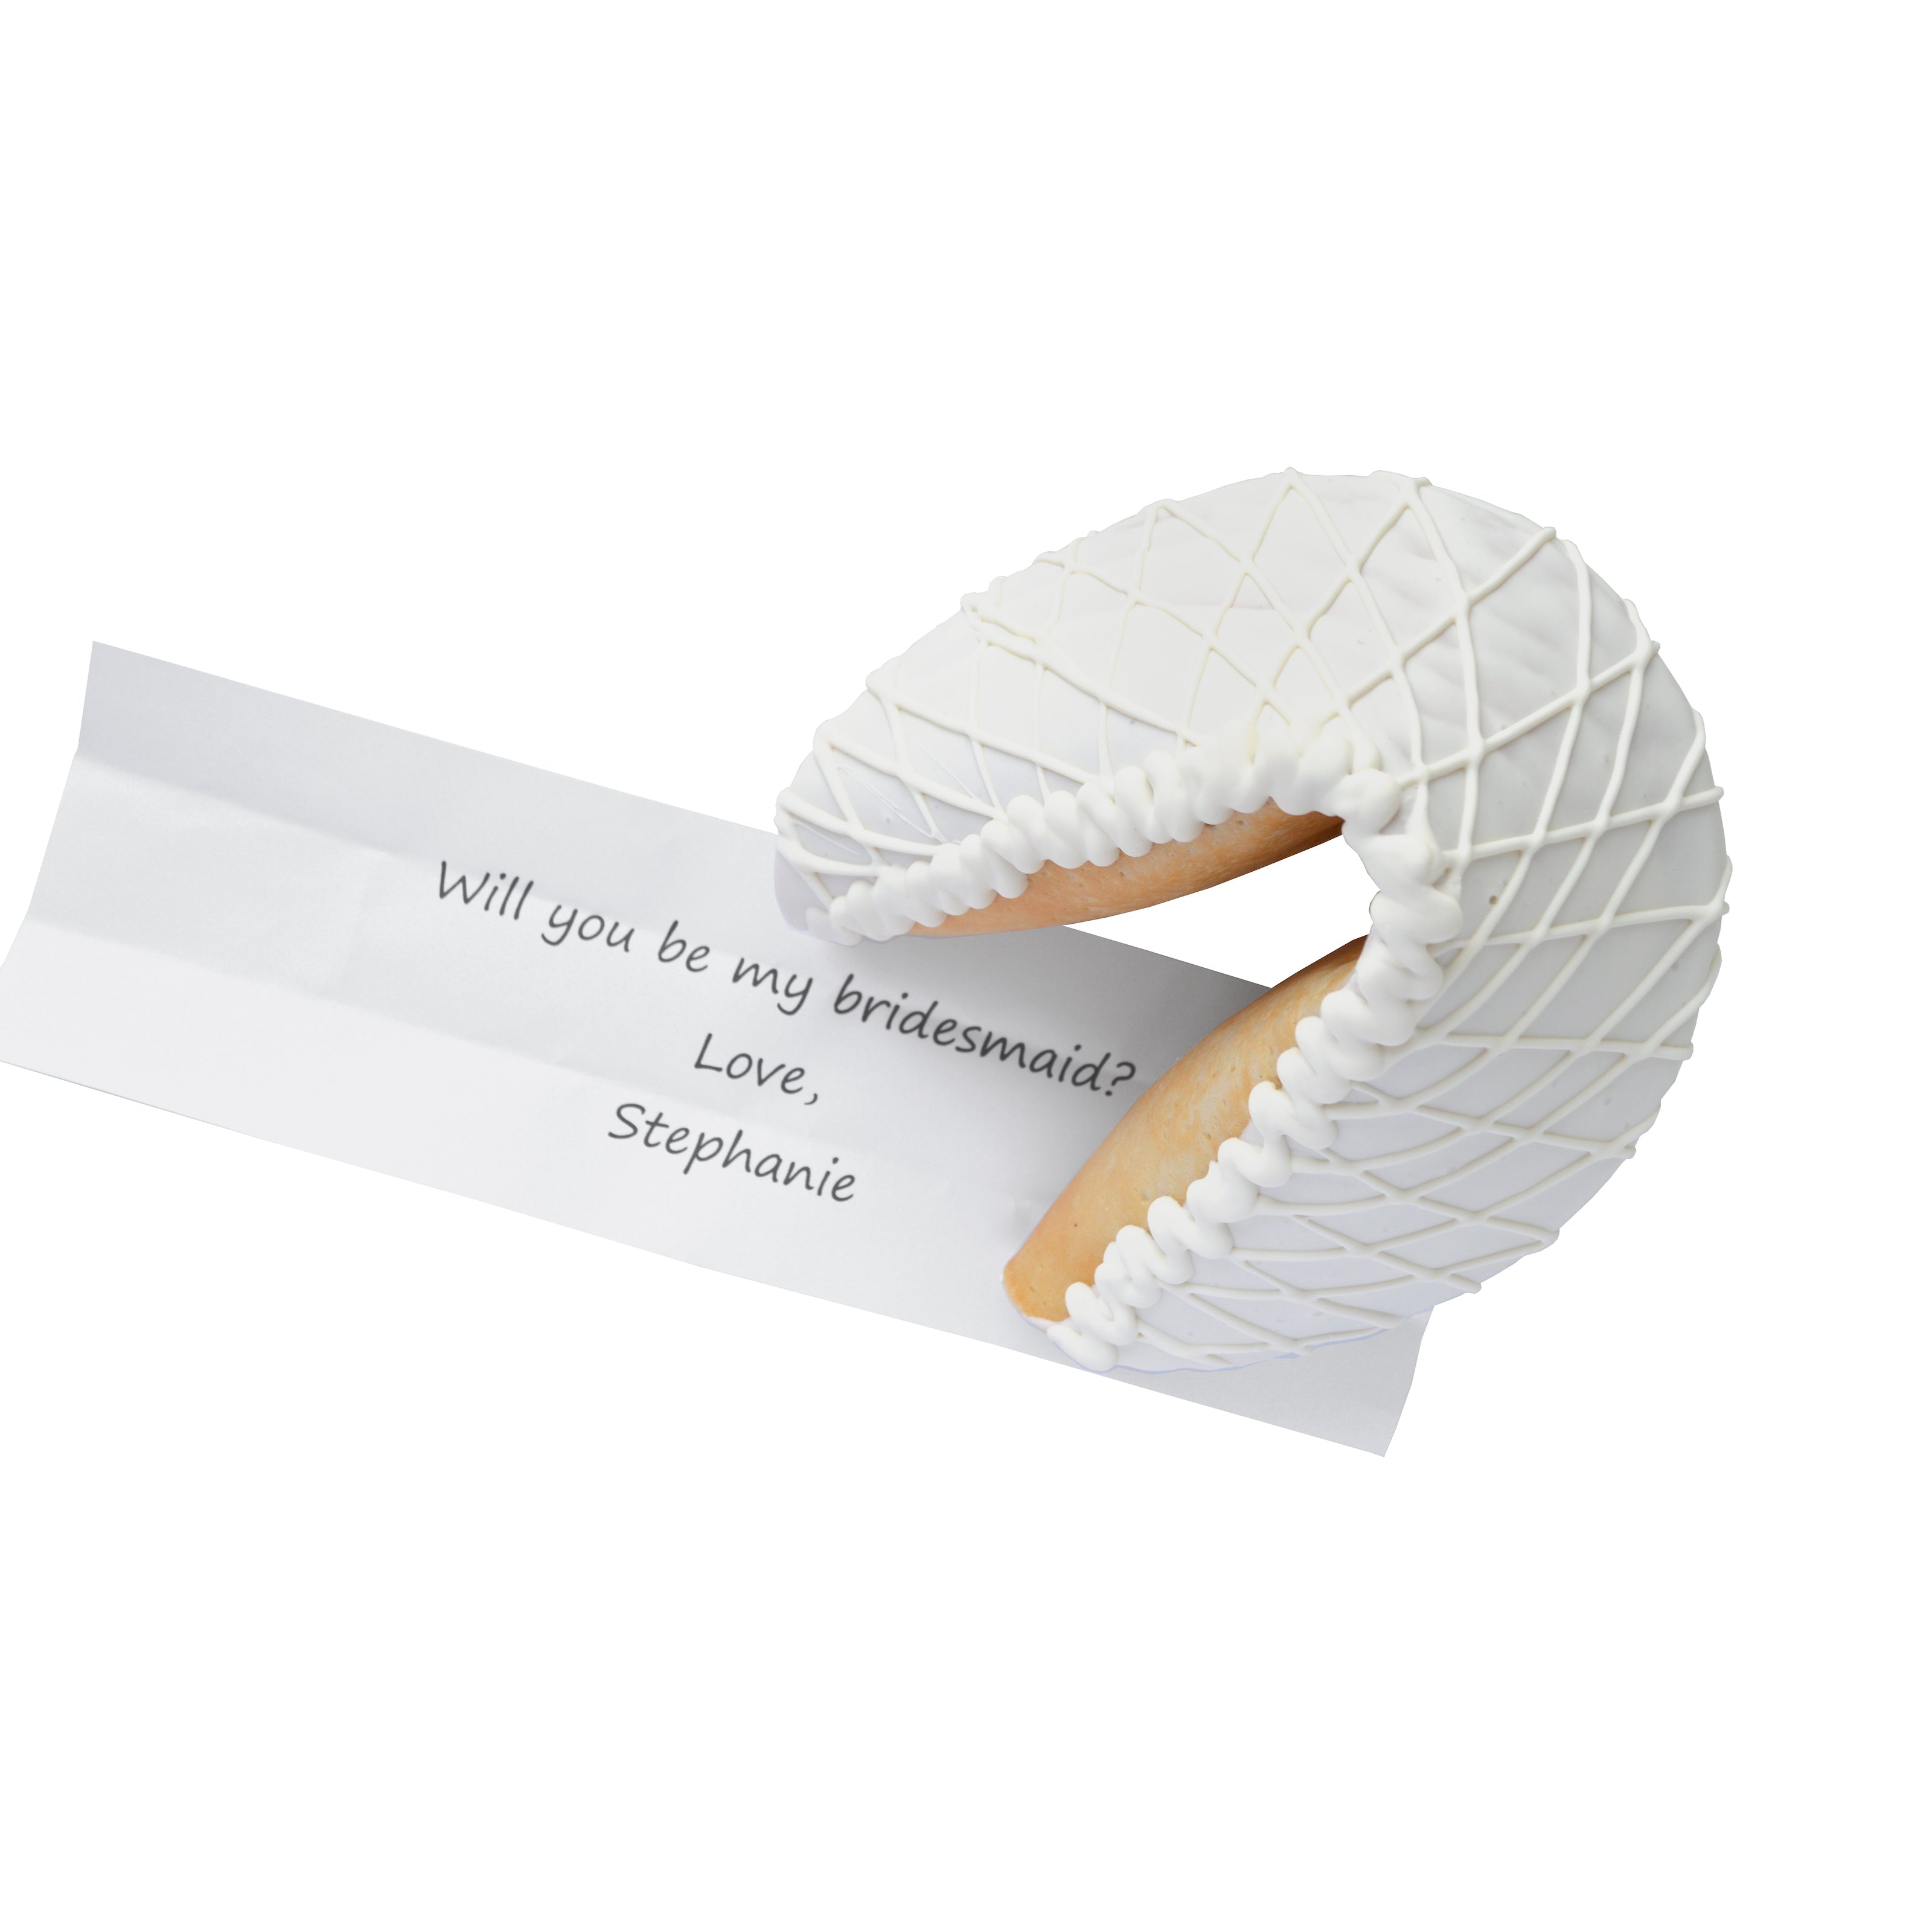 LARGE FORTUNE COOKIE - OFF WHITE